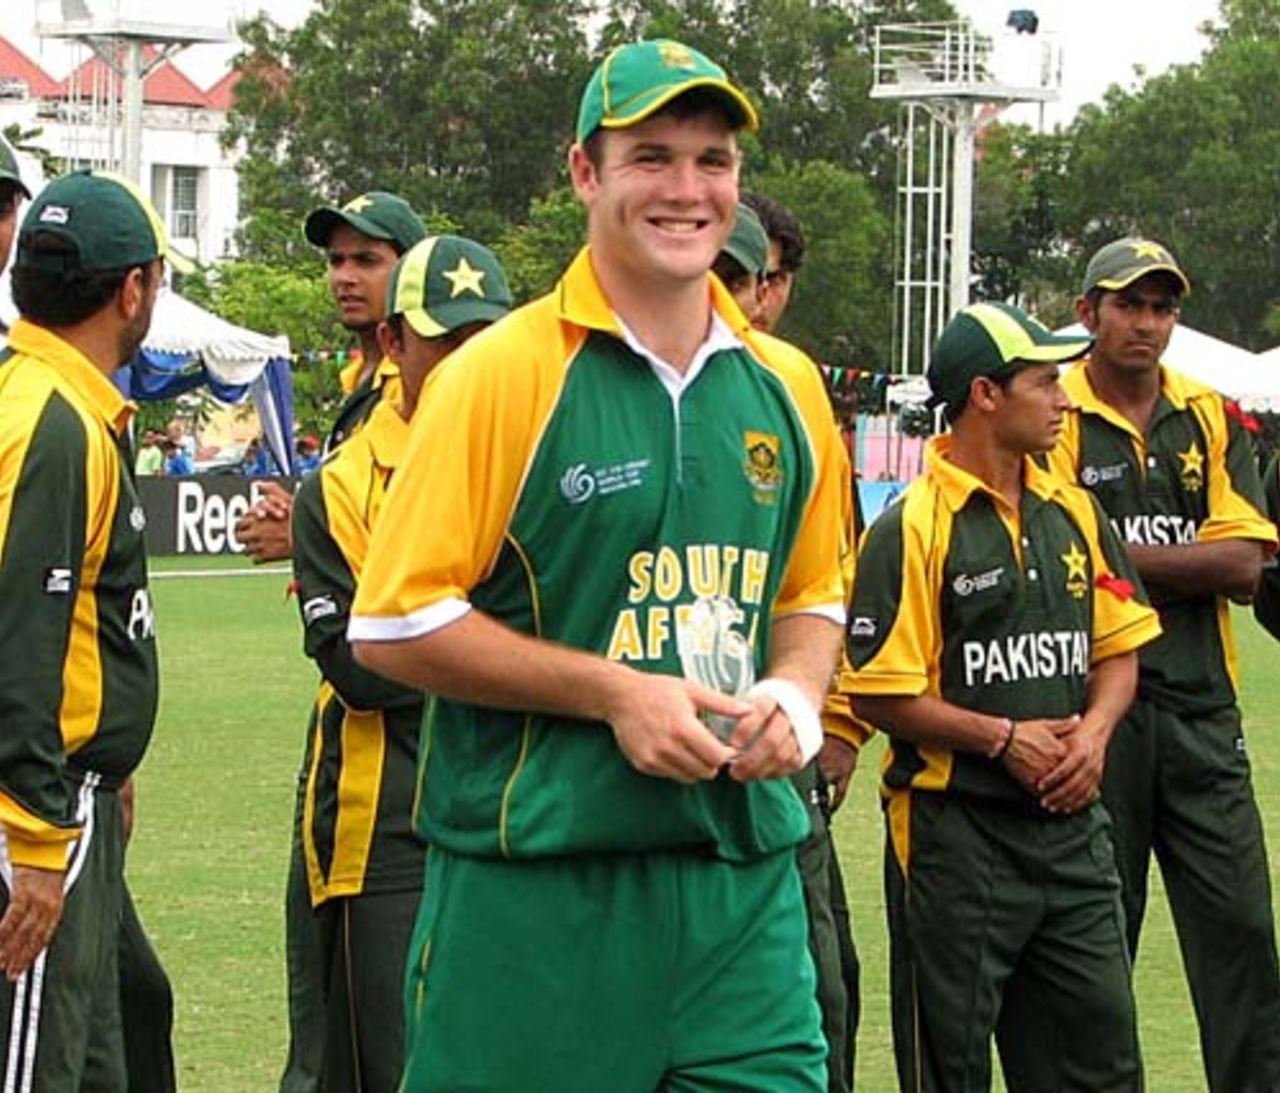 A beaming JJ Smuts with the Man-of-the-Match award, Pakistan v South Africa, 2nd semi-final, Under-19 World Cup, Kuala Lumpur, March 1, 2008 